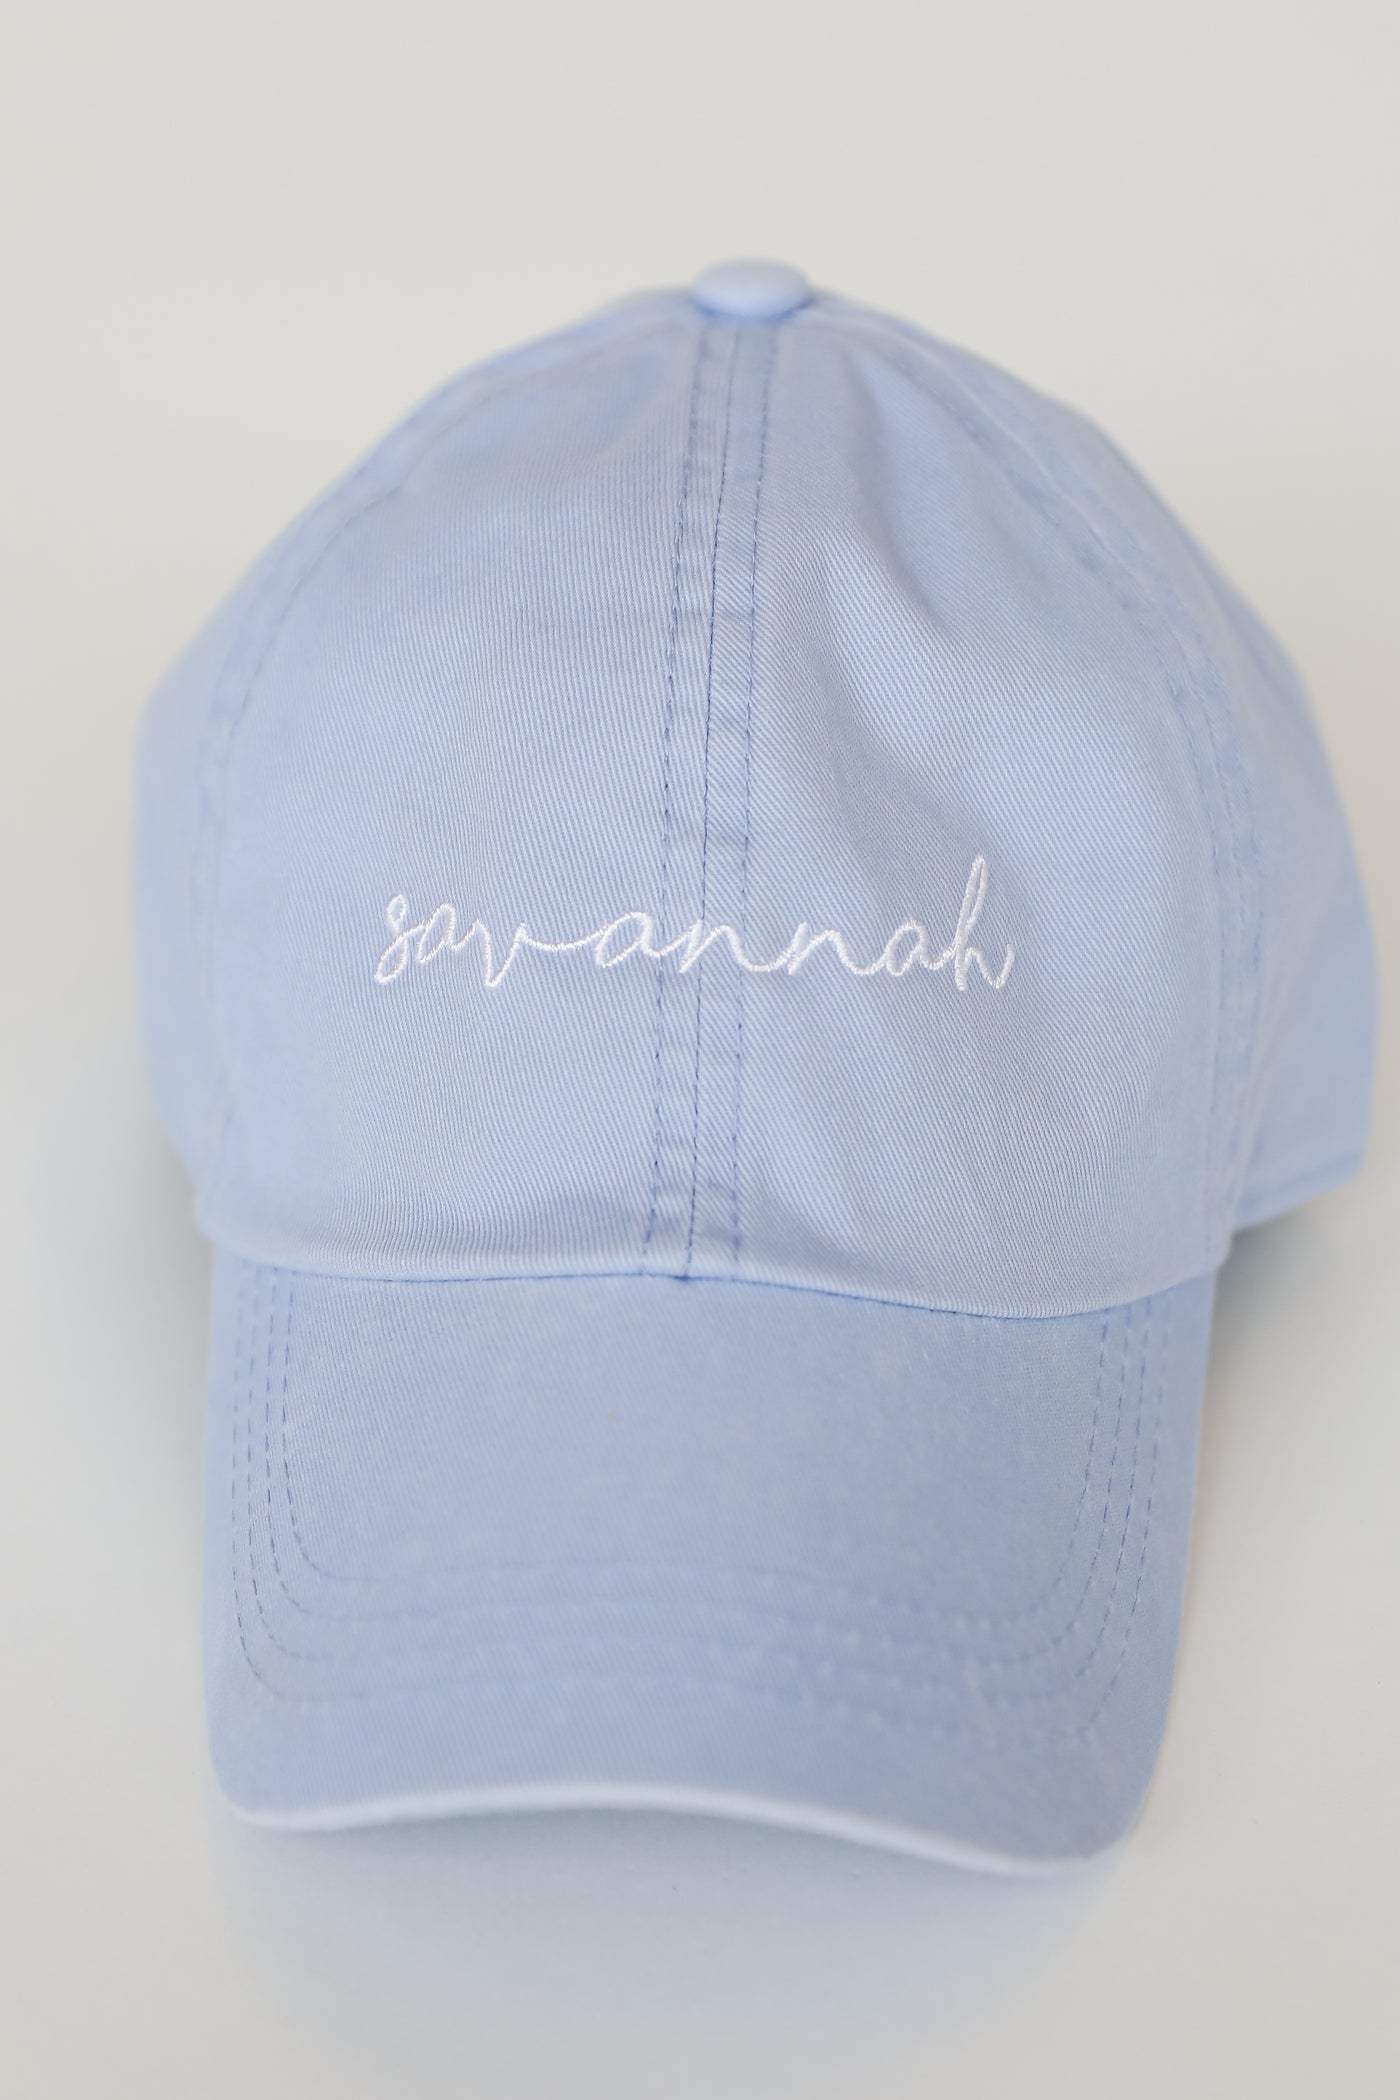 Savannah Embroidered Hat in light blue flat lay